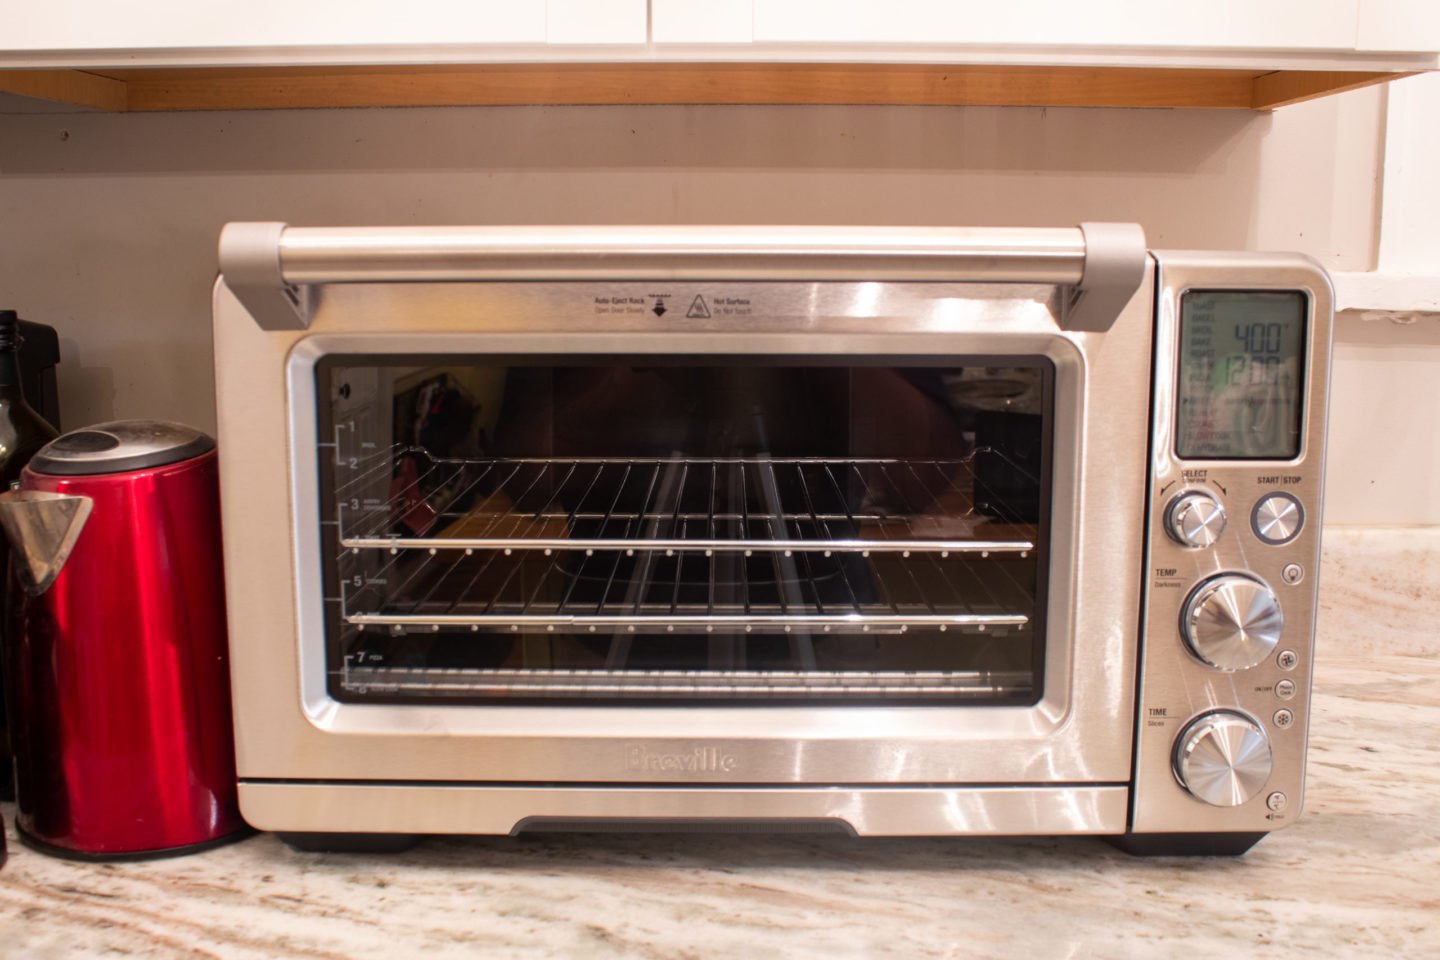 Breville Smart Oven on the Countertop